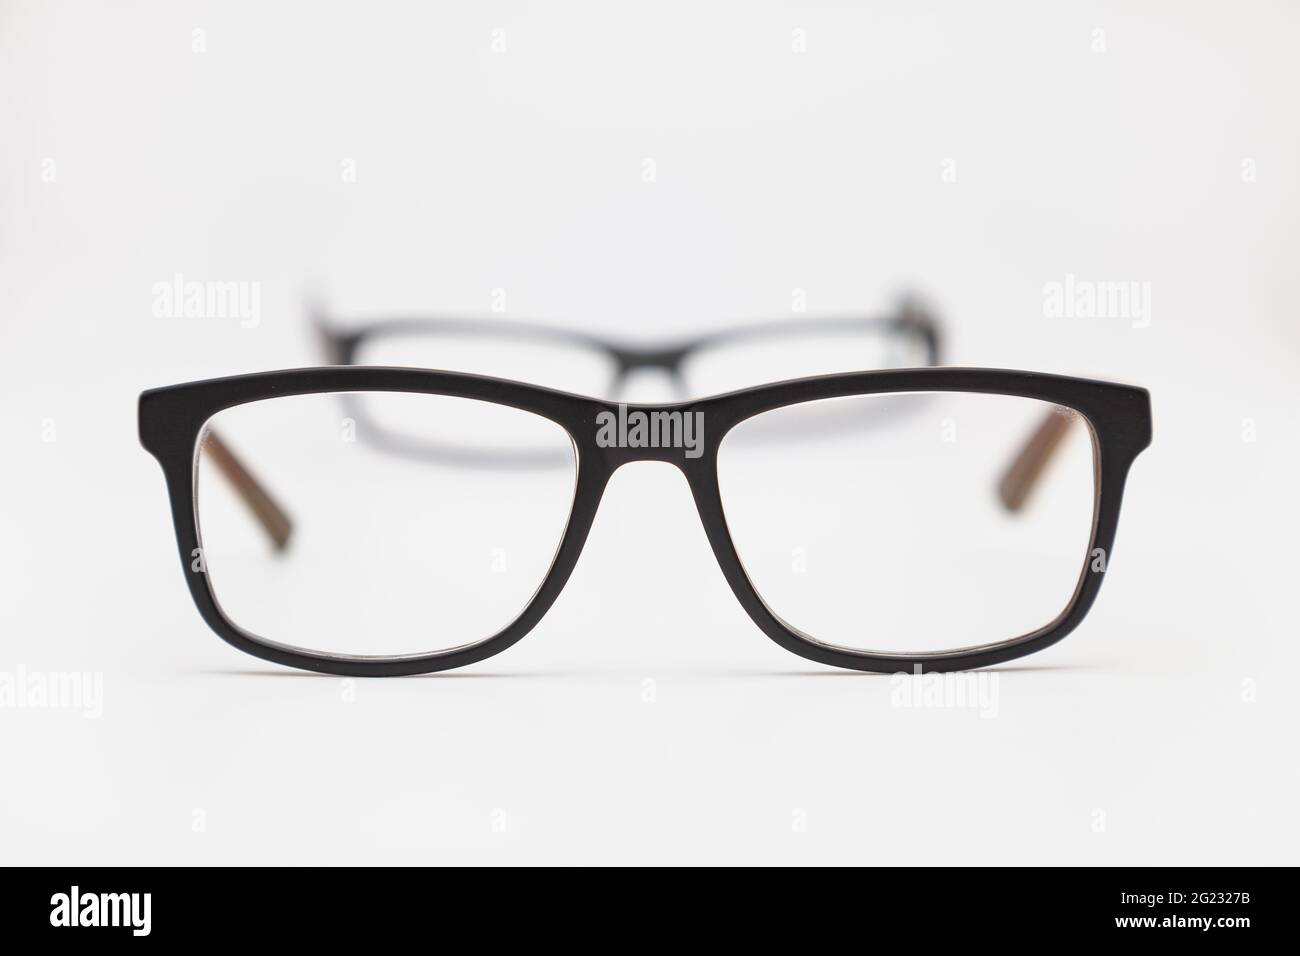 Two pairs of eyeglasses placed on a white surface. The closest ones are ...